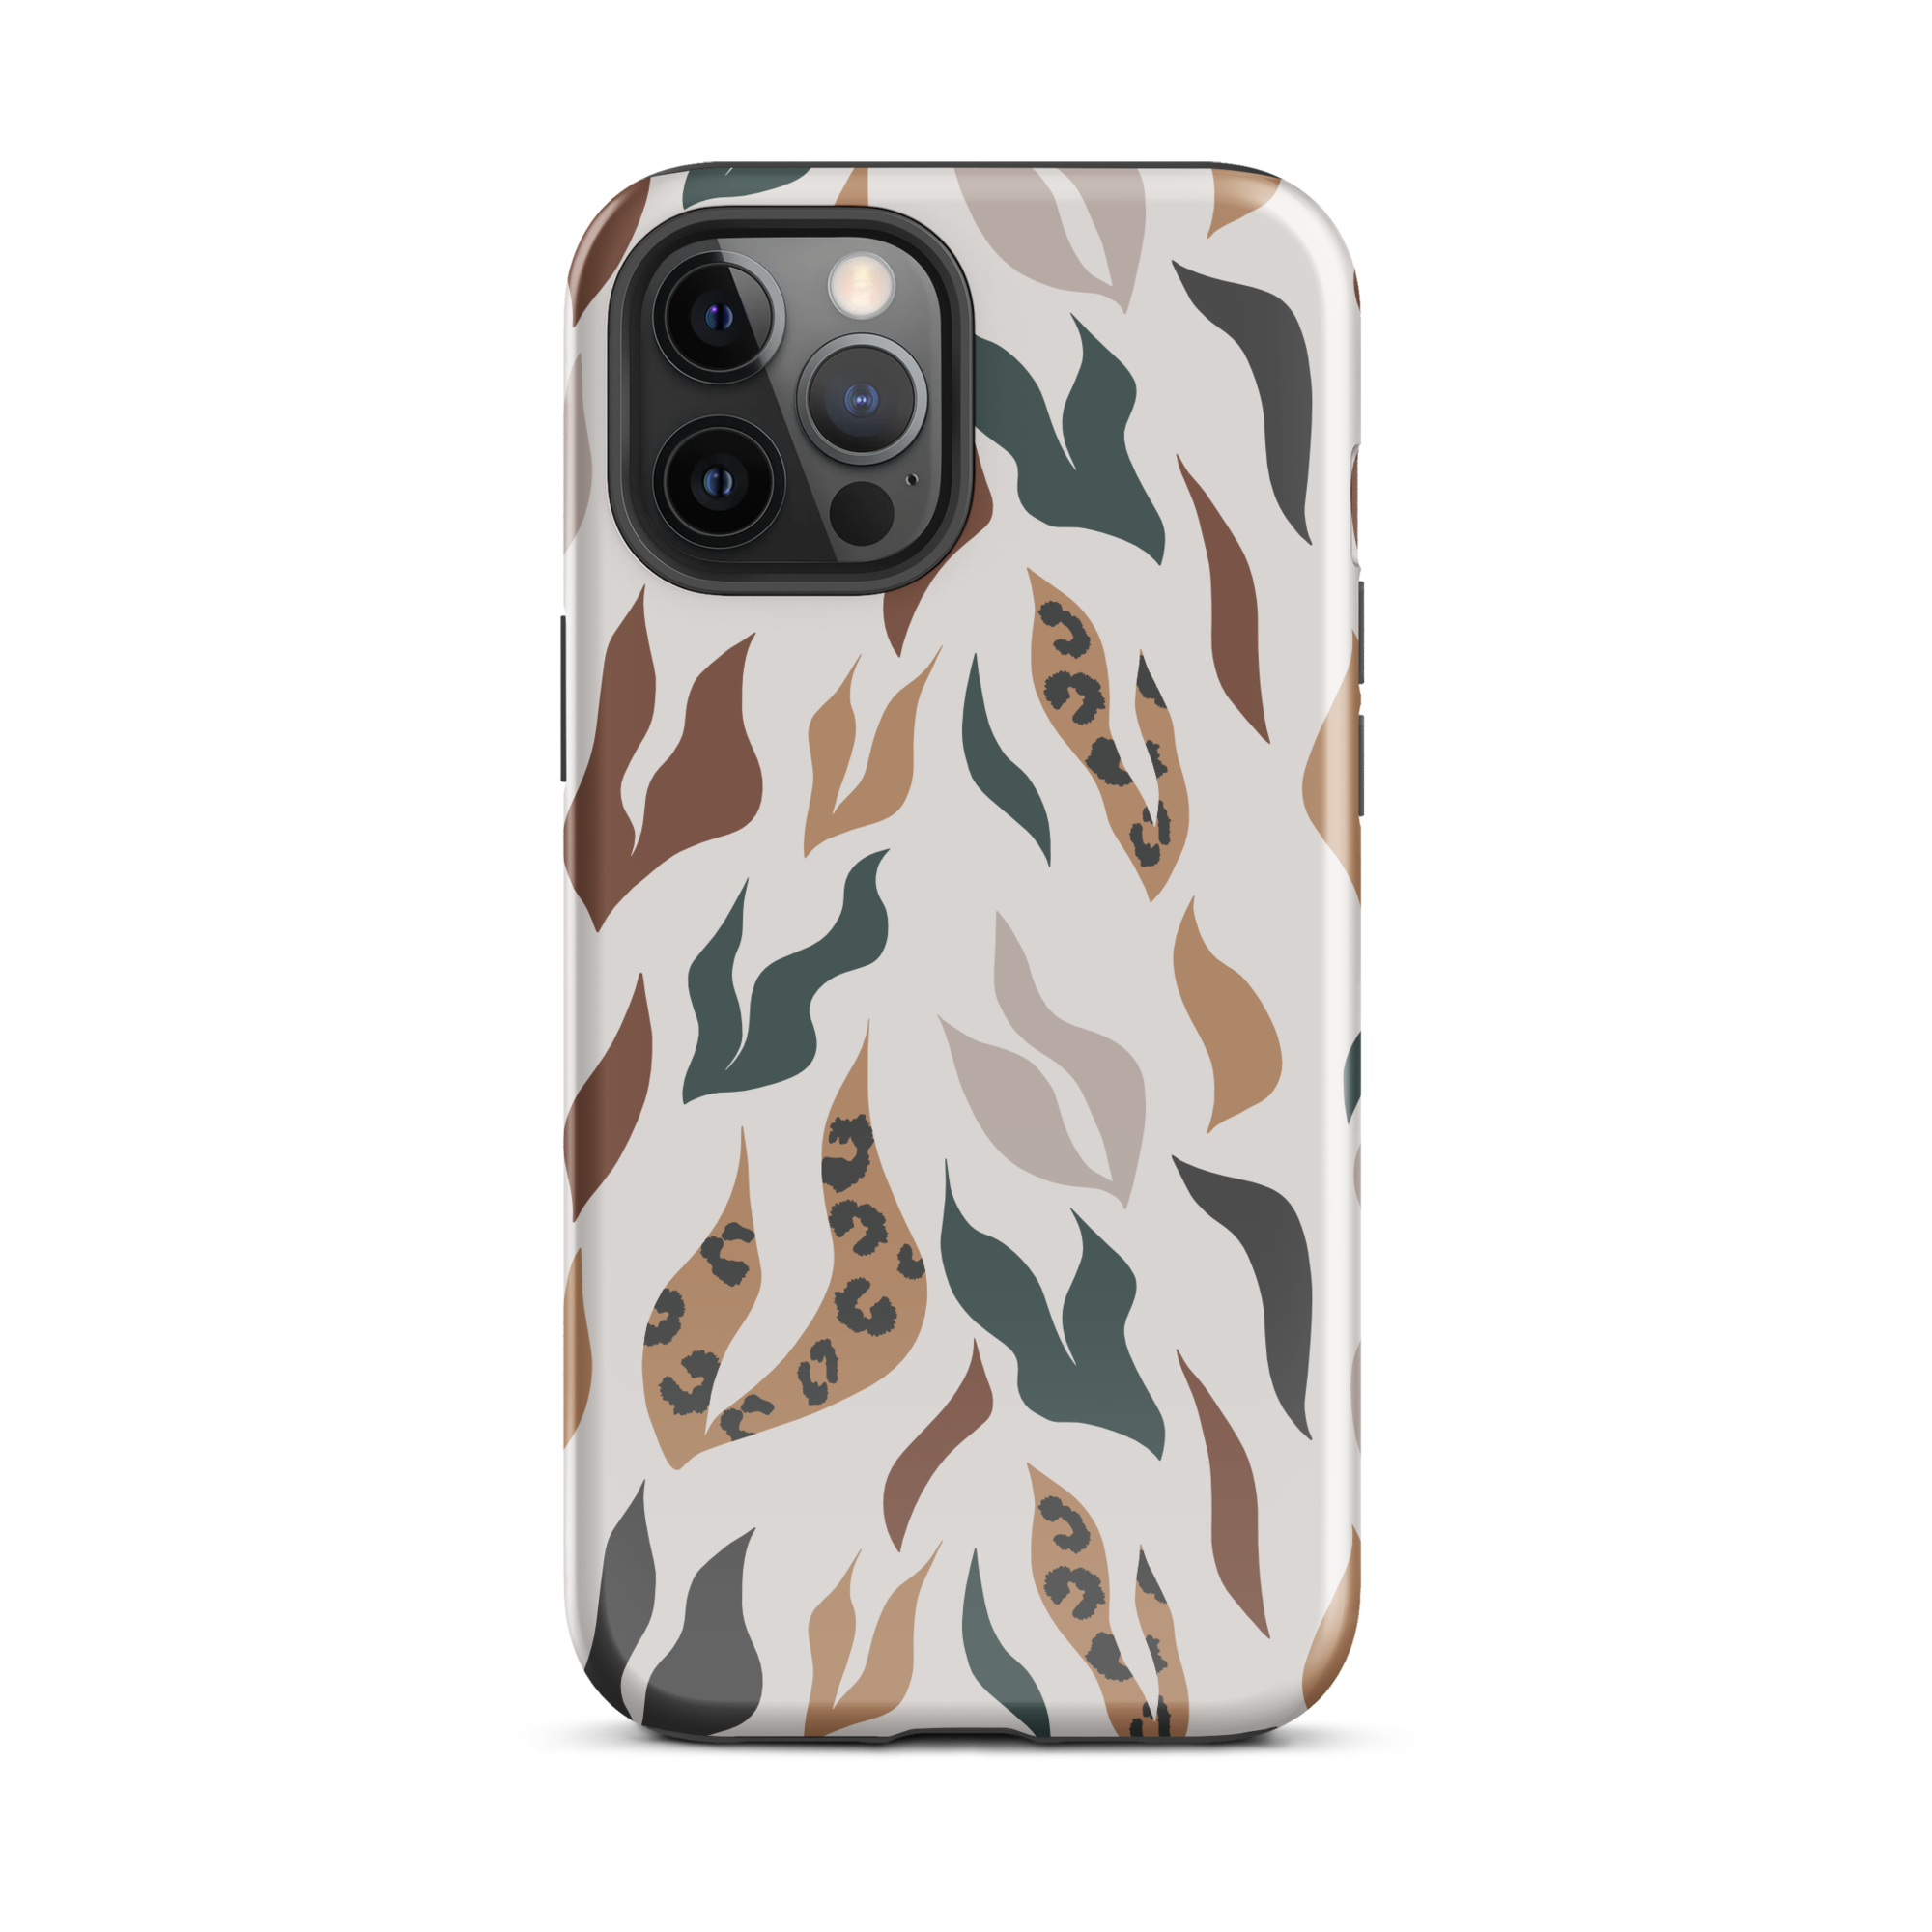 Leopard Leaves iPhone 12 Pro Max Case